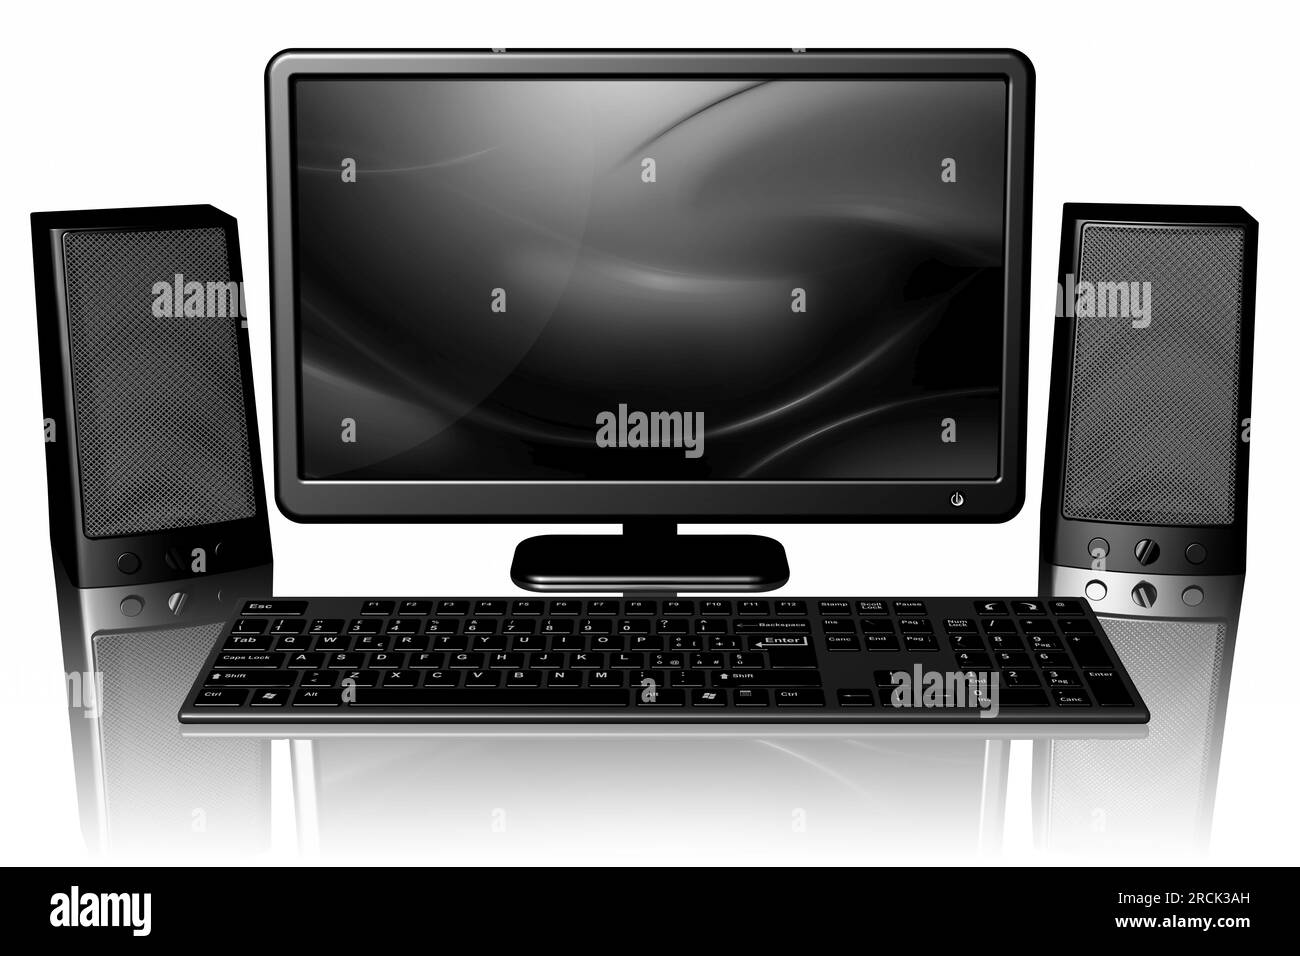 Pc. Computer. Desktop isolated on white background suitable for inserting text and images into the screen. Stock Photo